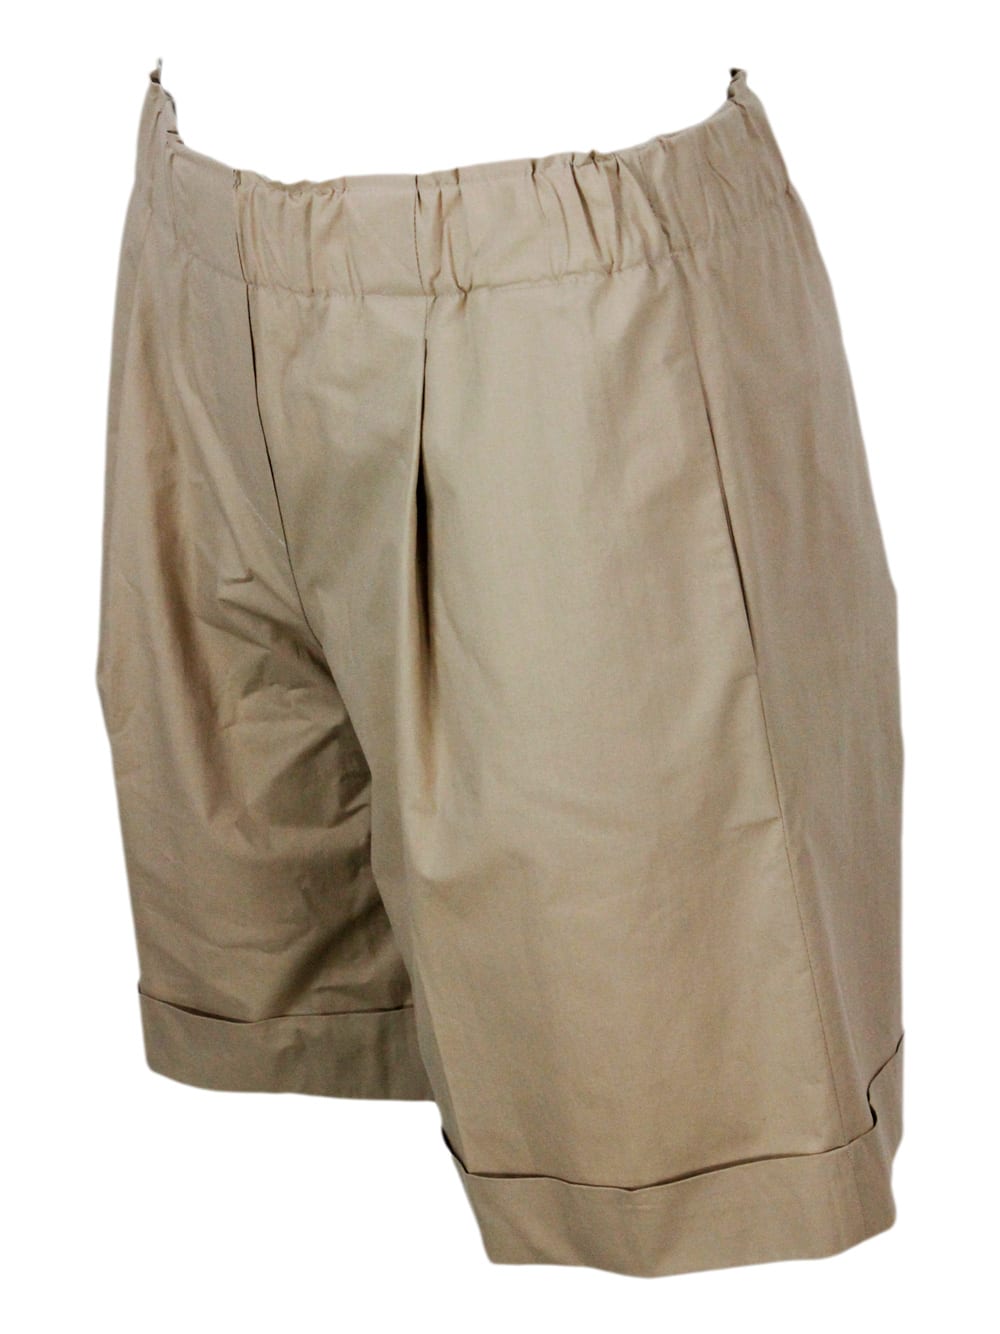 Shop Antonelli Bermuda Shorts With Elasticated Waist And Welt Pockets With Pleats And Turn-up At The Bottom Made Of In Beige